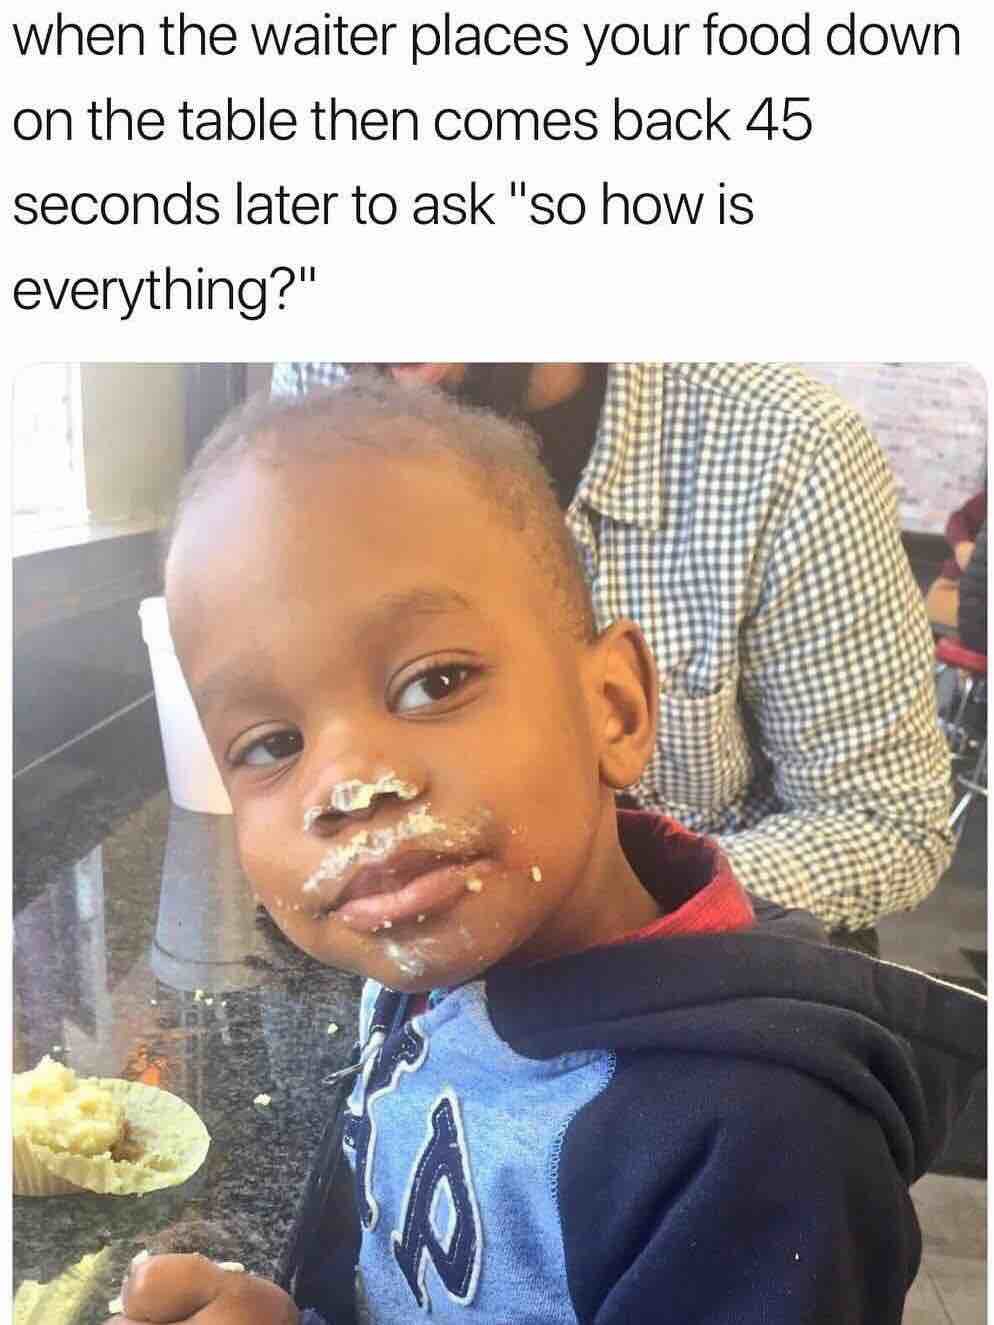 die laughing super funny memes - when the waiter places your food down on the table then comes back 45 seconds later to ask "so how is everything?"